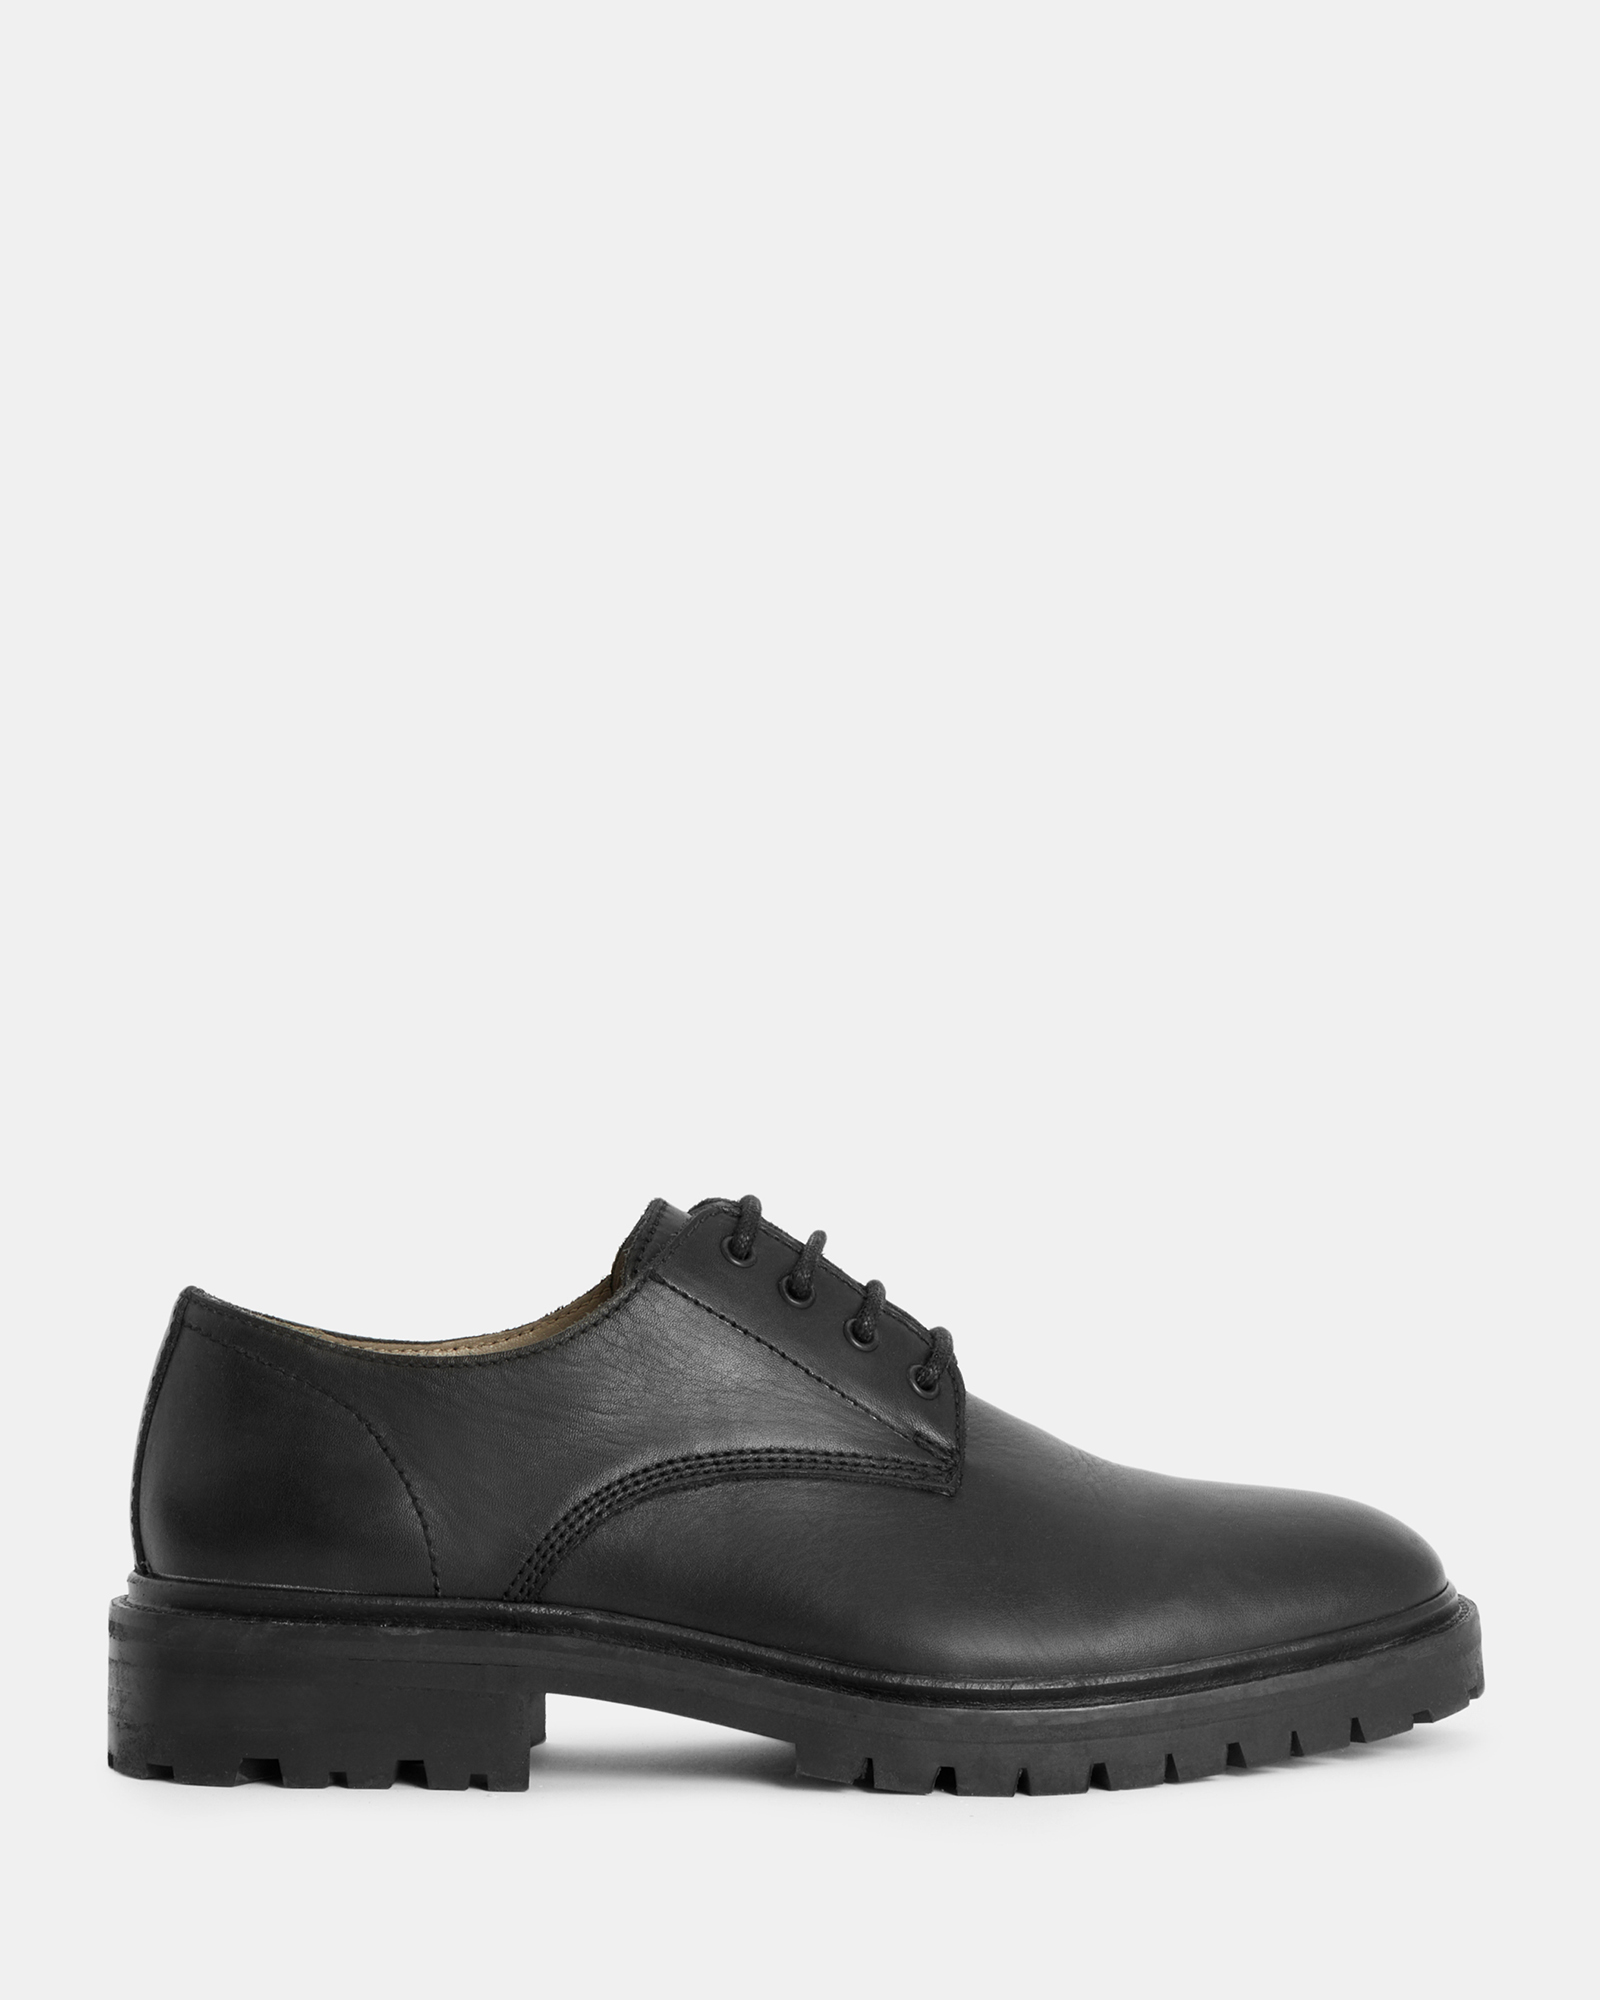 Jarred Cleated Sole Formal Leather Shoes Black | ALLSAINTS